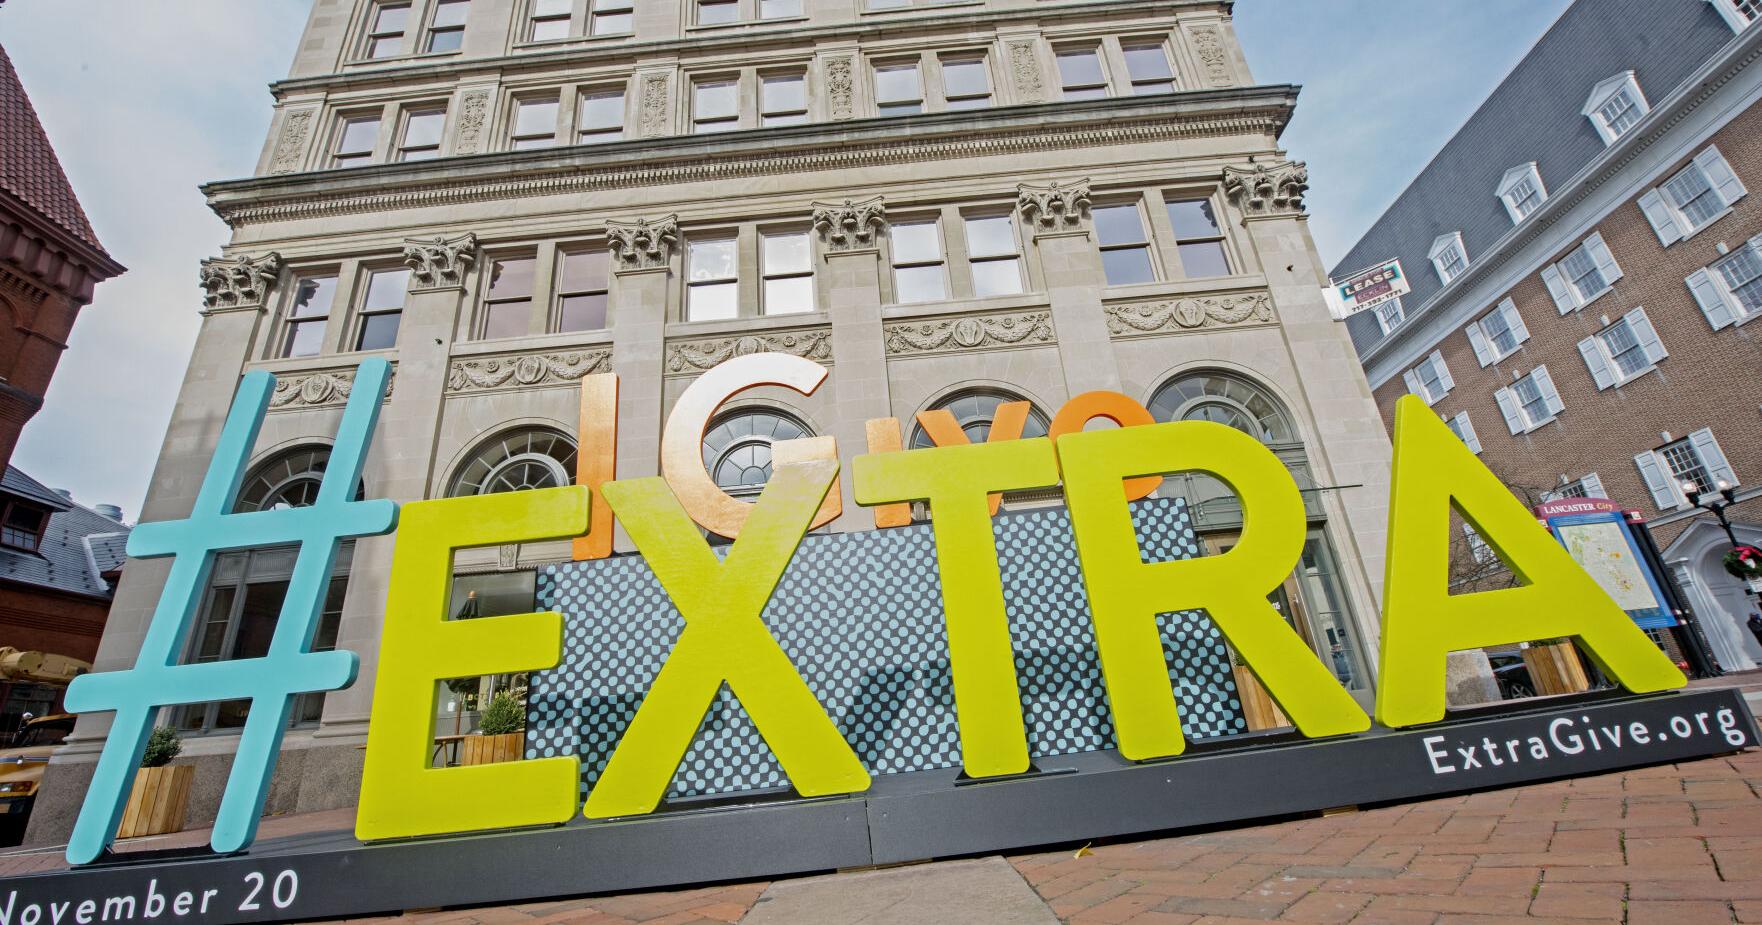 ExtraGive's adjustments are steps toward a more welcoming, inclusive community [editorial]